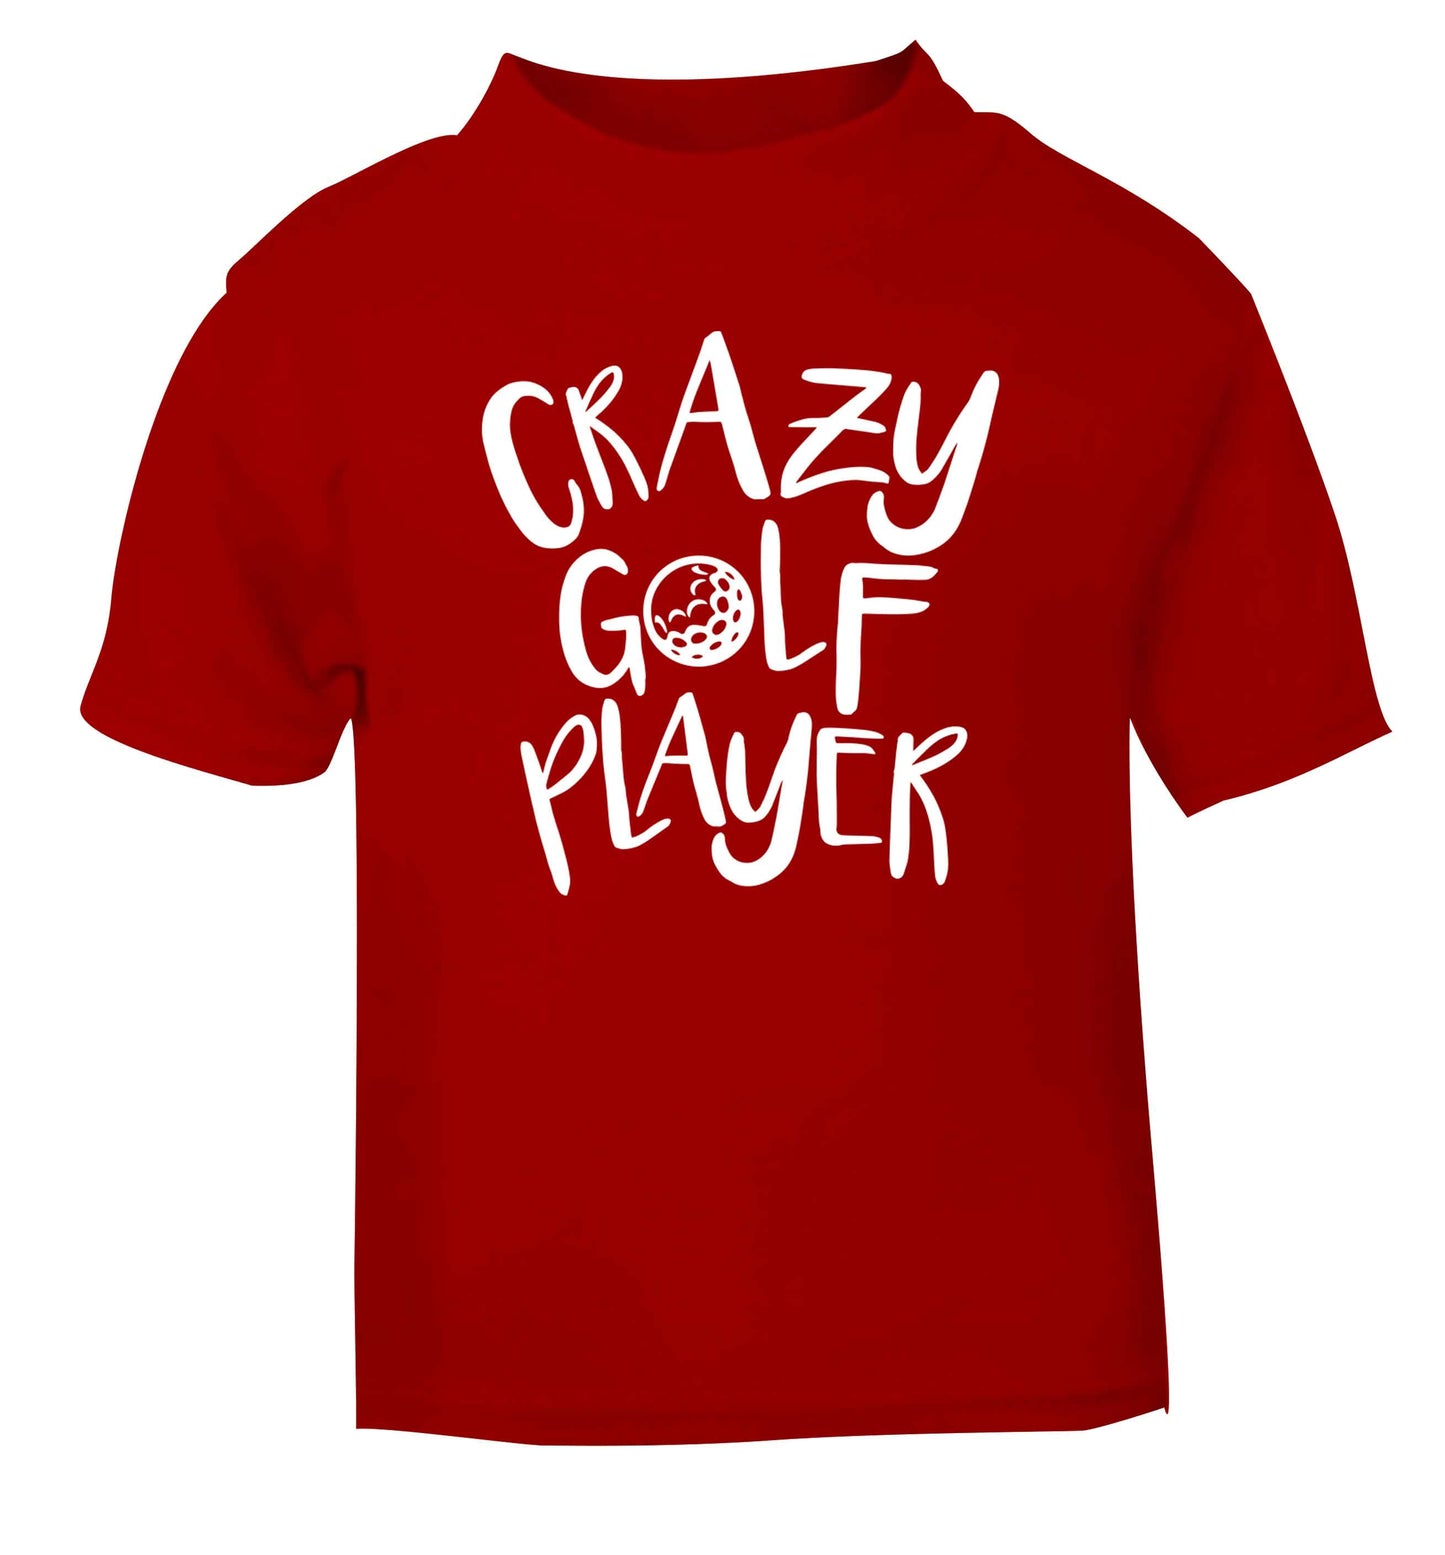 Crazy golf player red Baby Toddler Tshirt 2 Years